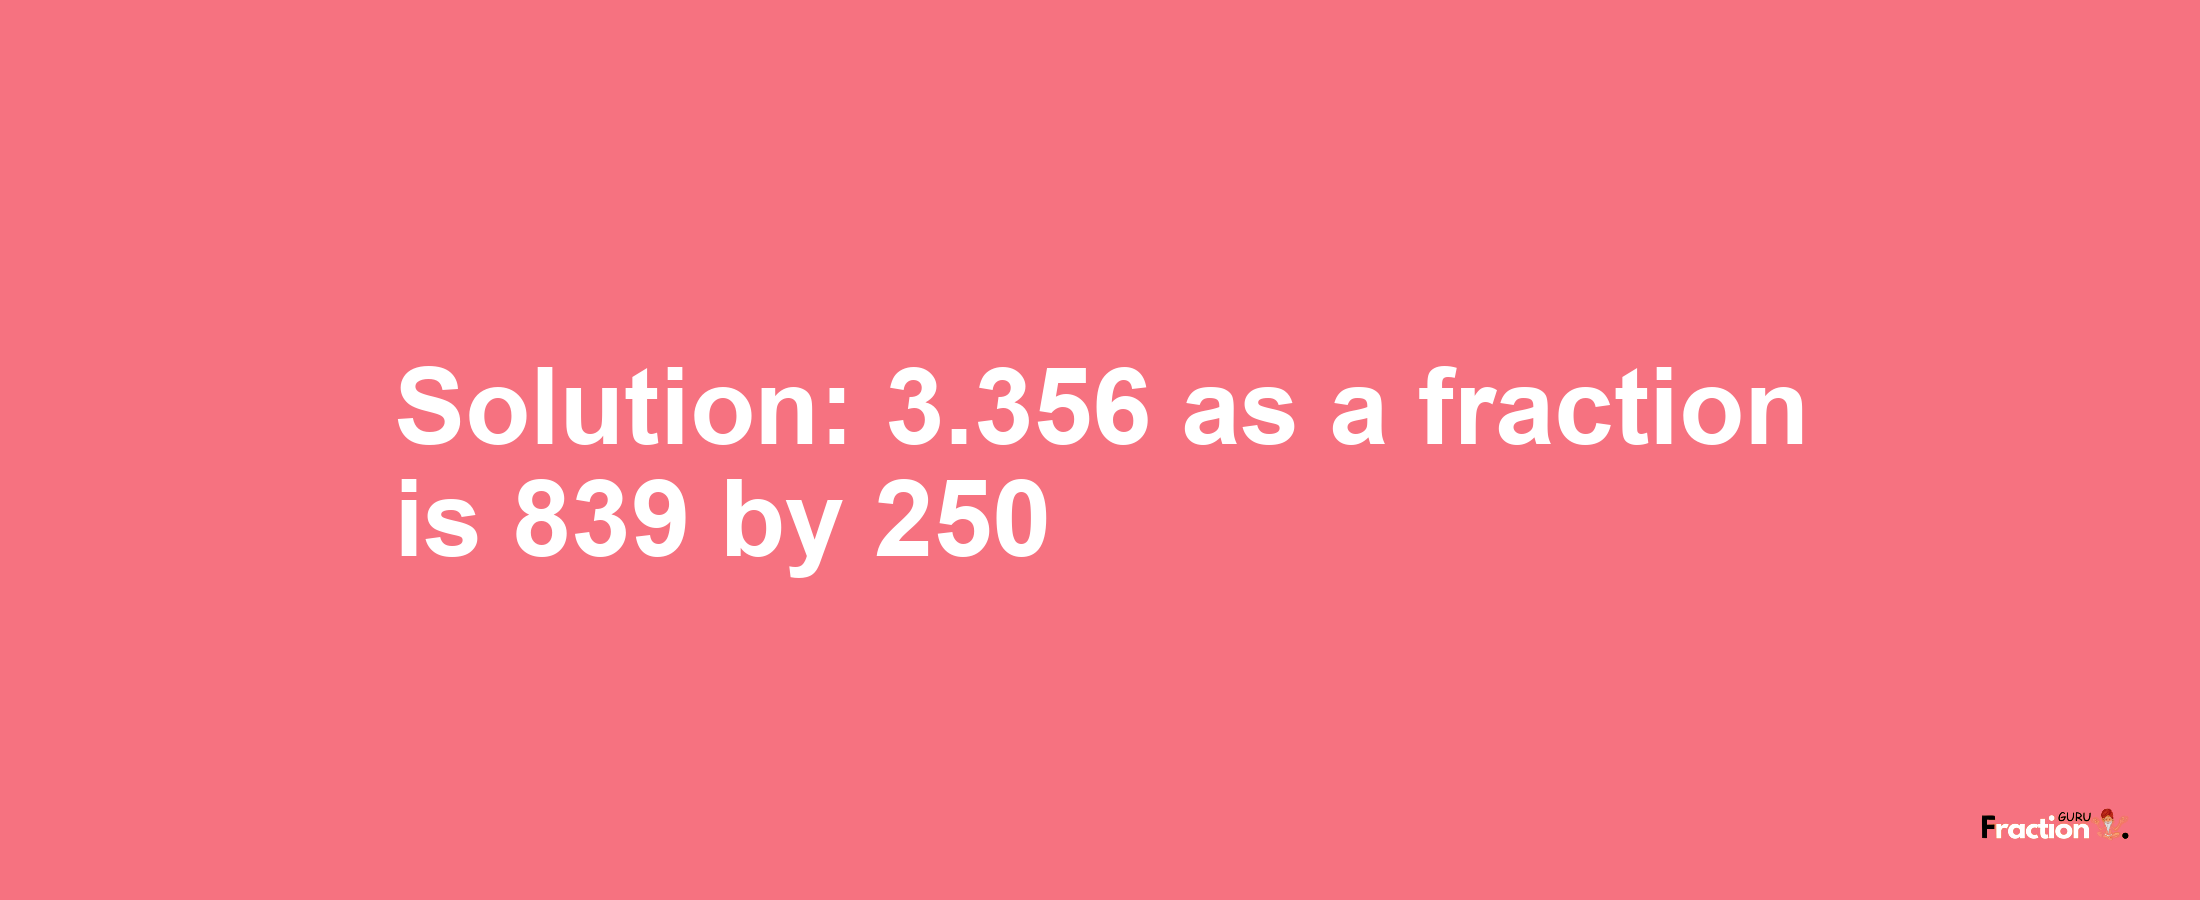 Solution:3.356 as a fraction is 839/250